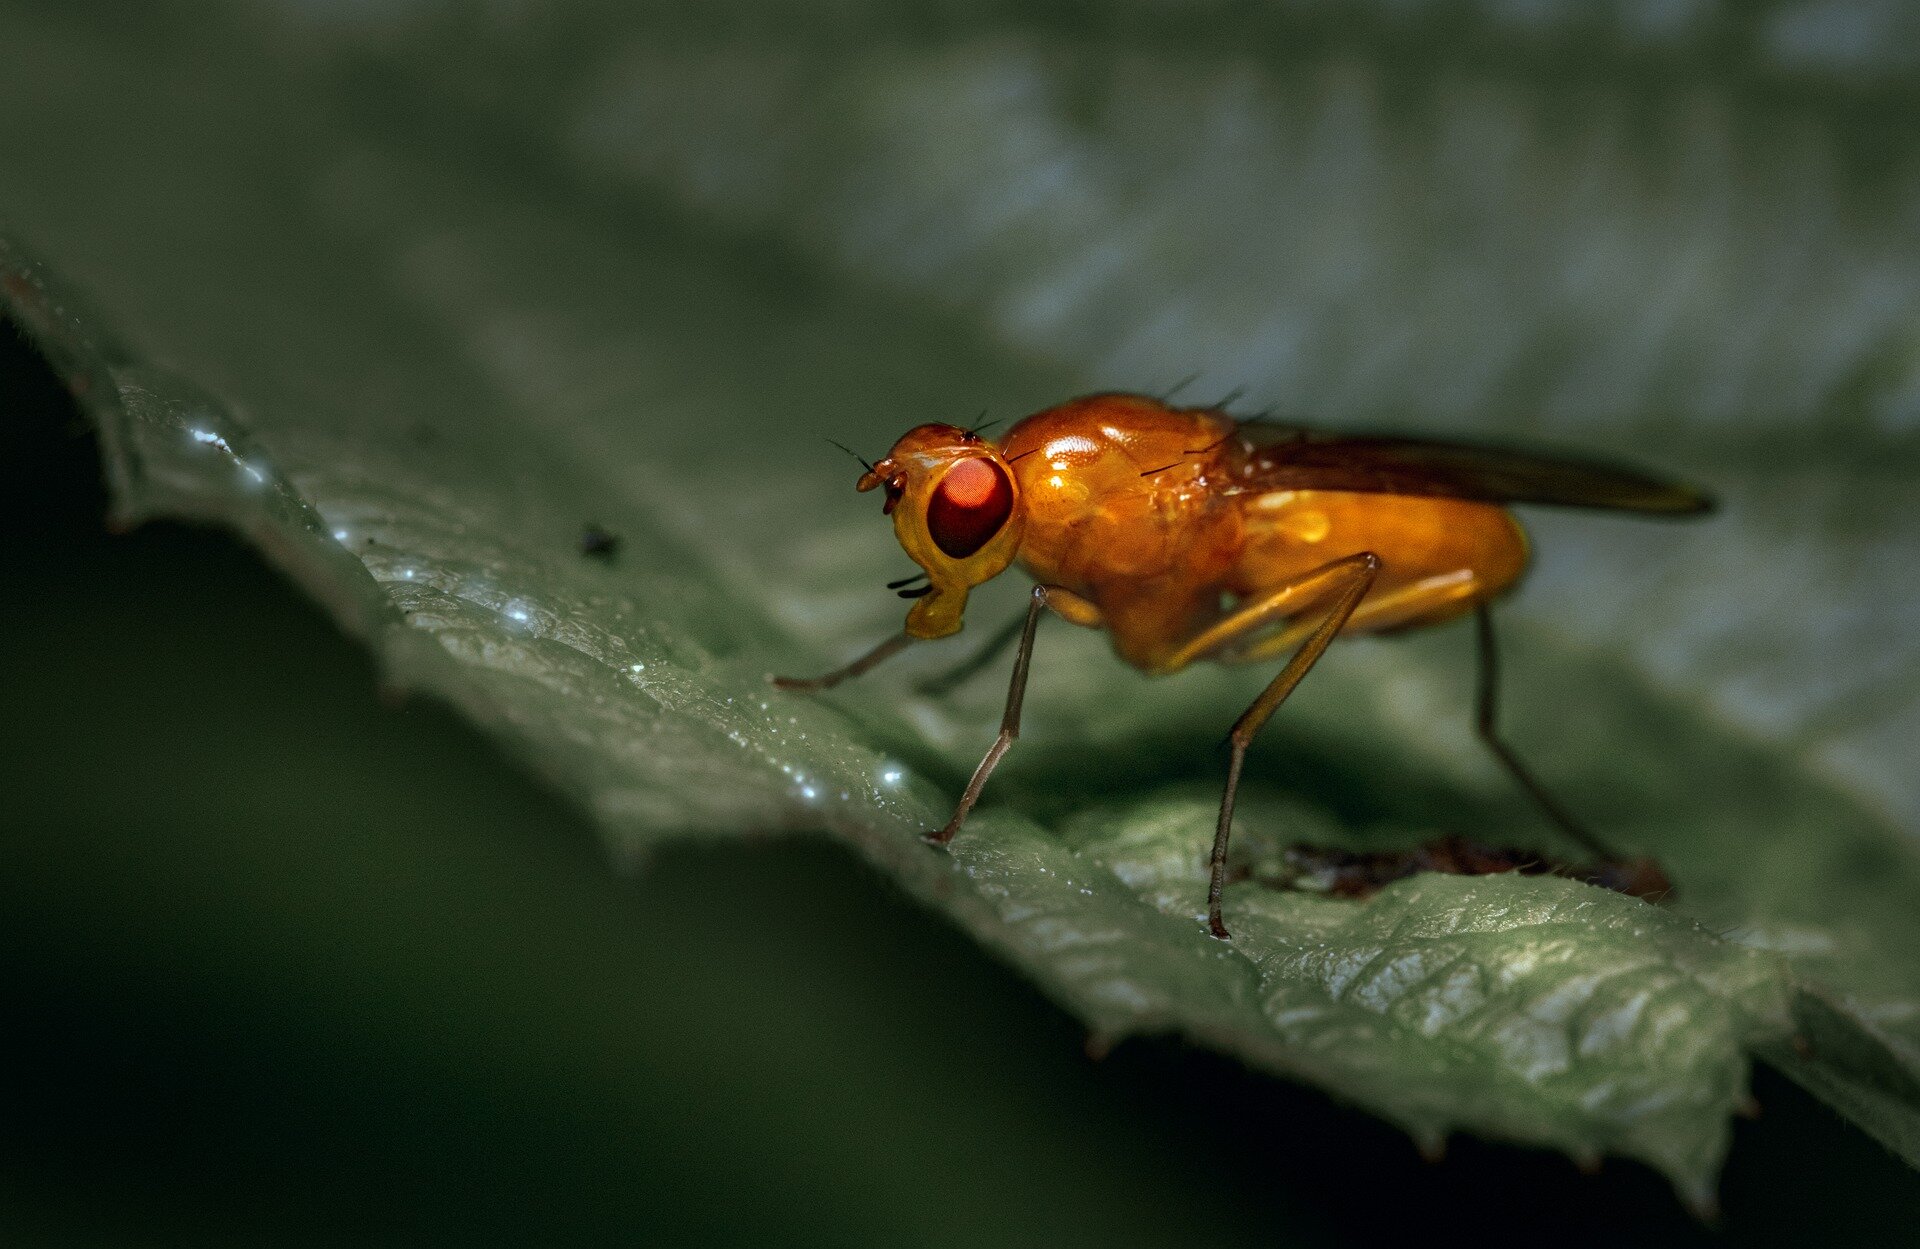 Fruit flies prioritize mating over survival: study